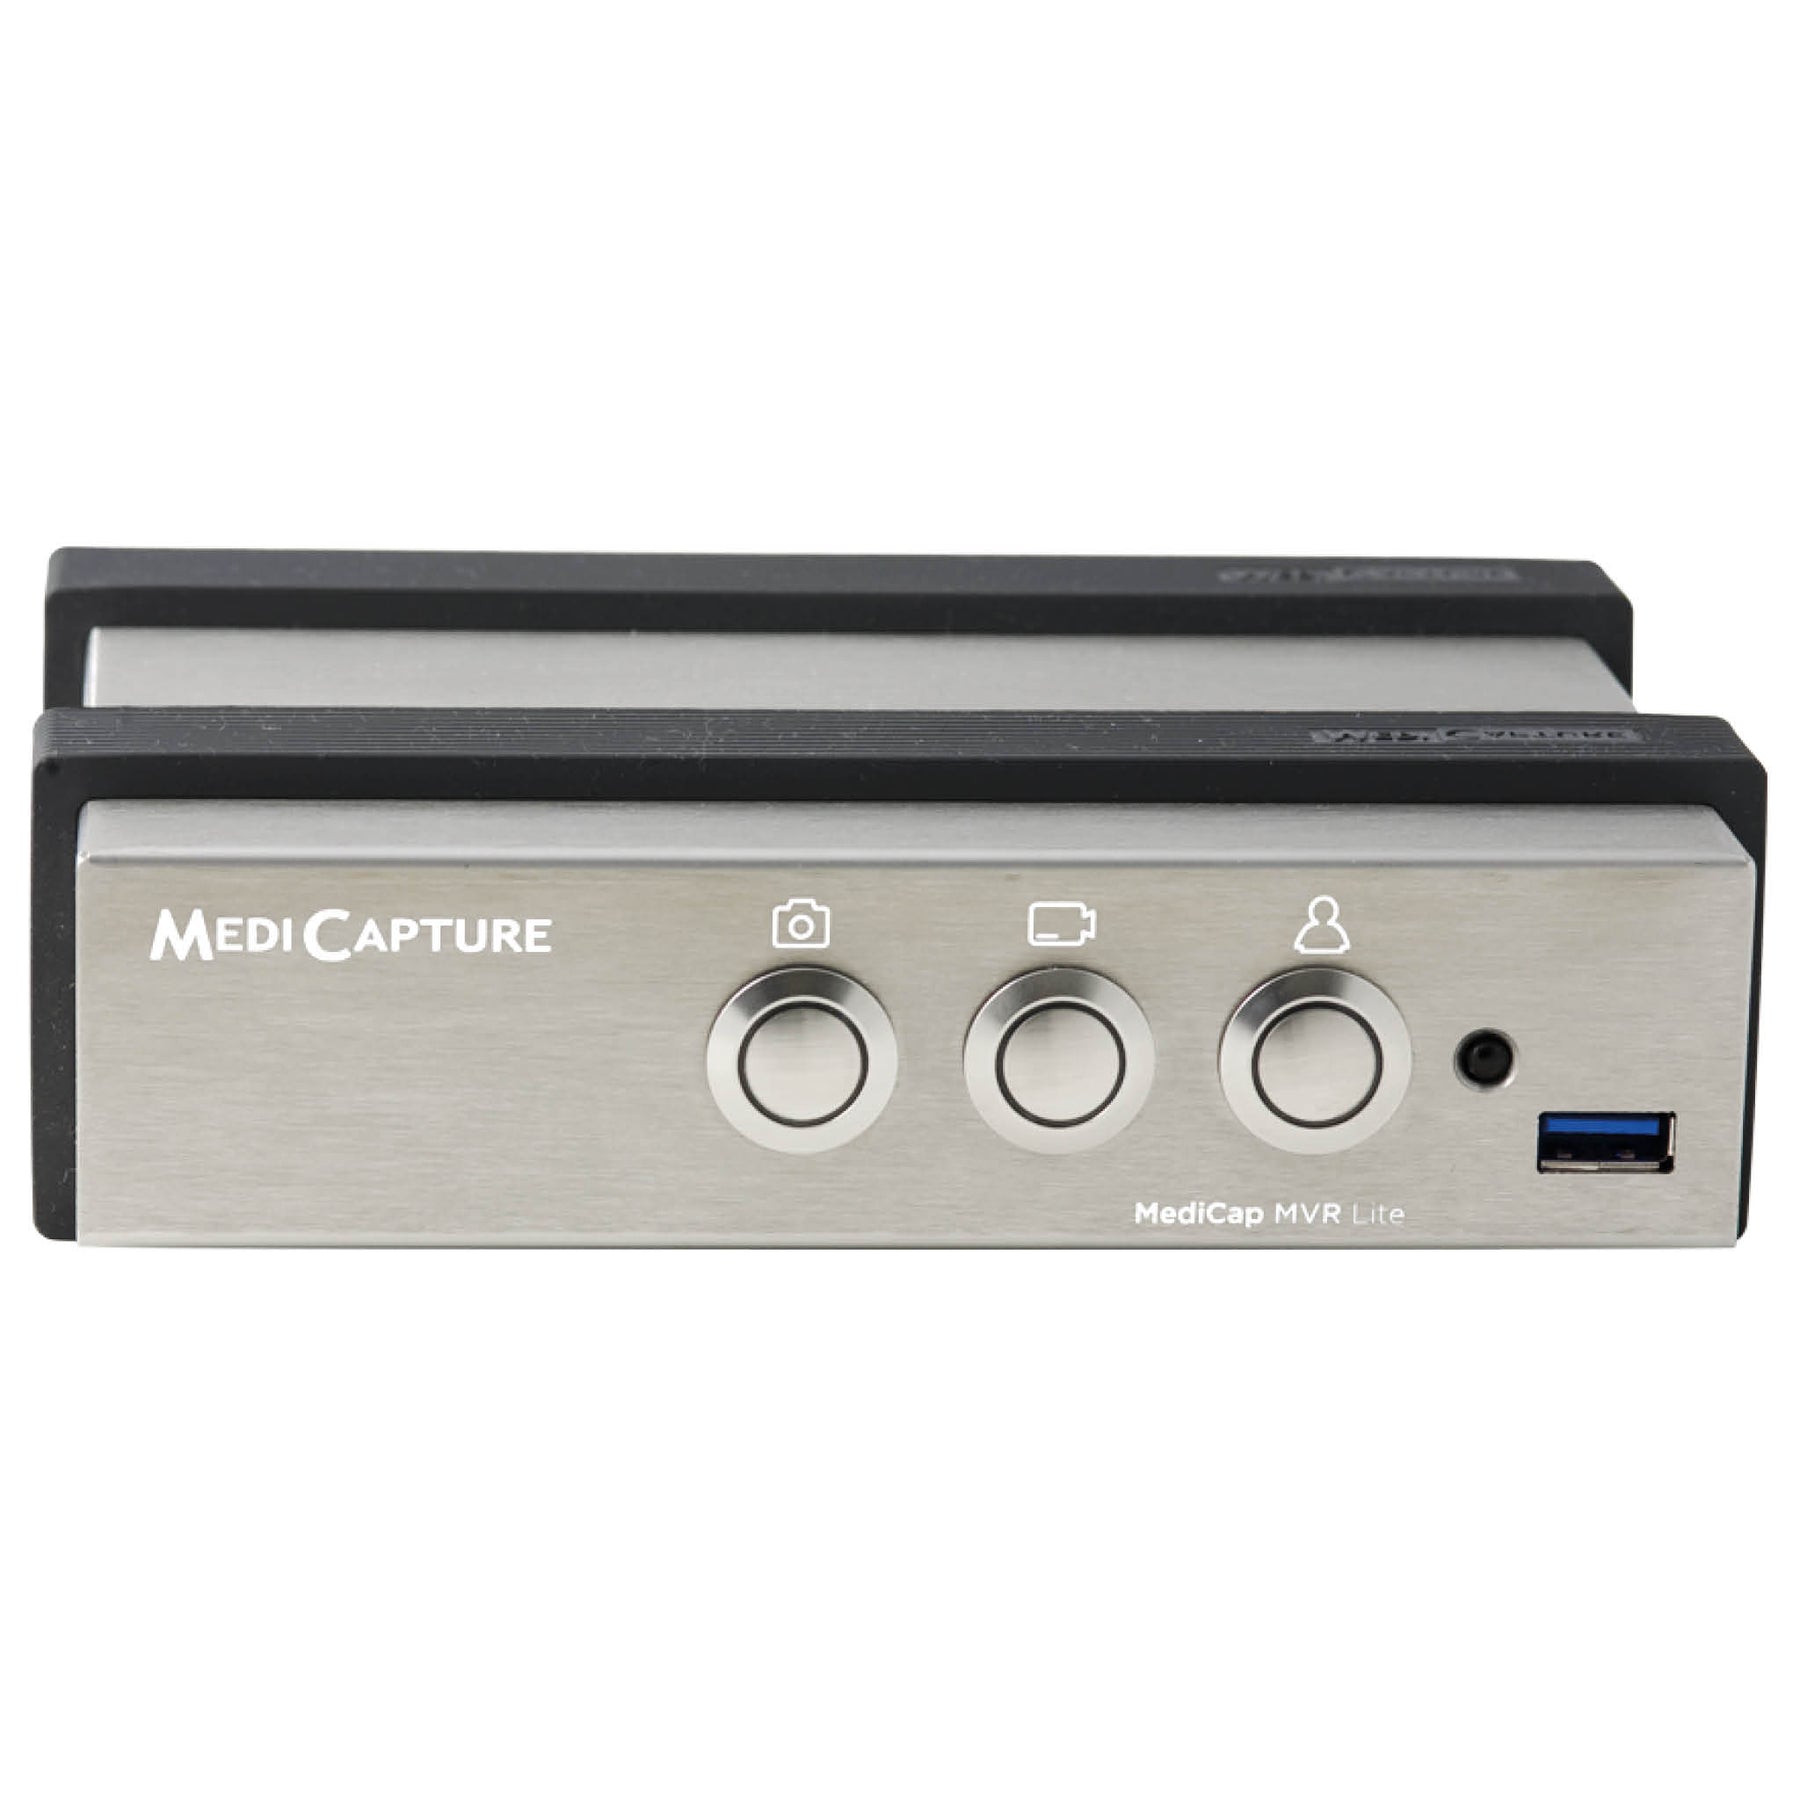 Medicapture MVR Lite 4K is a premium quality, easy-to-use, 4K Ultra HD medical video recorder